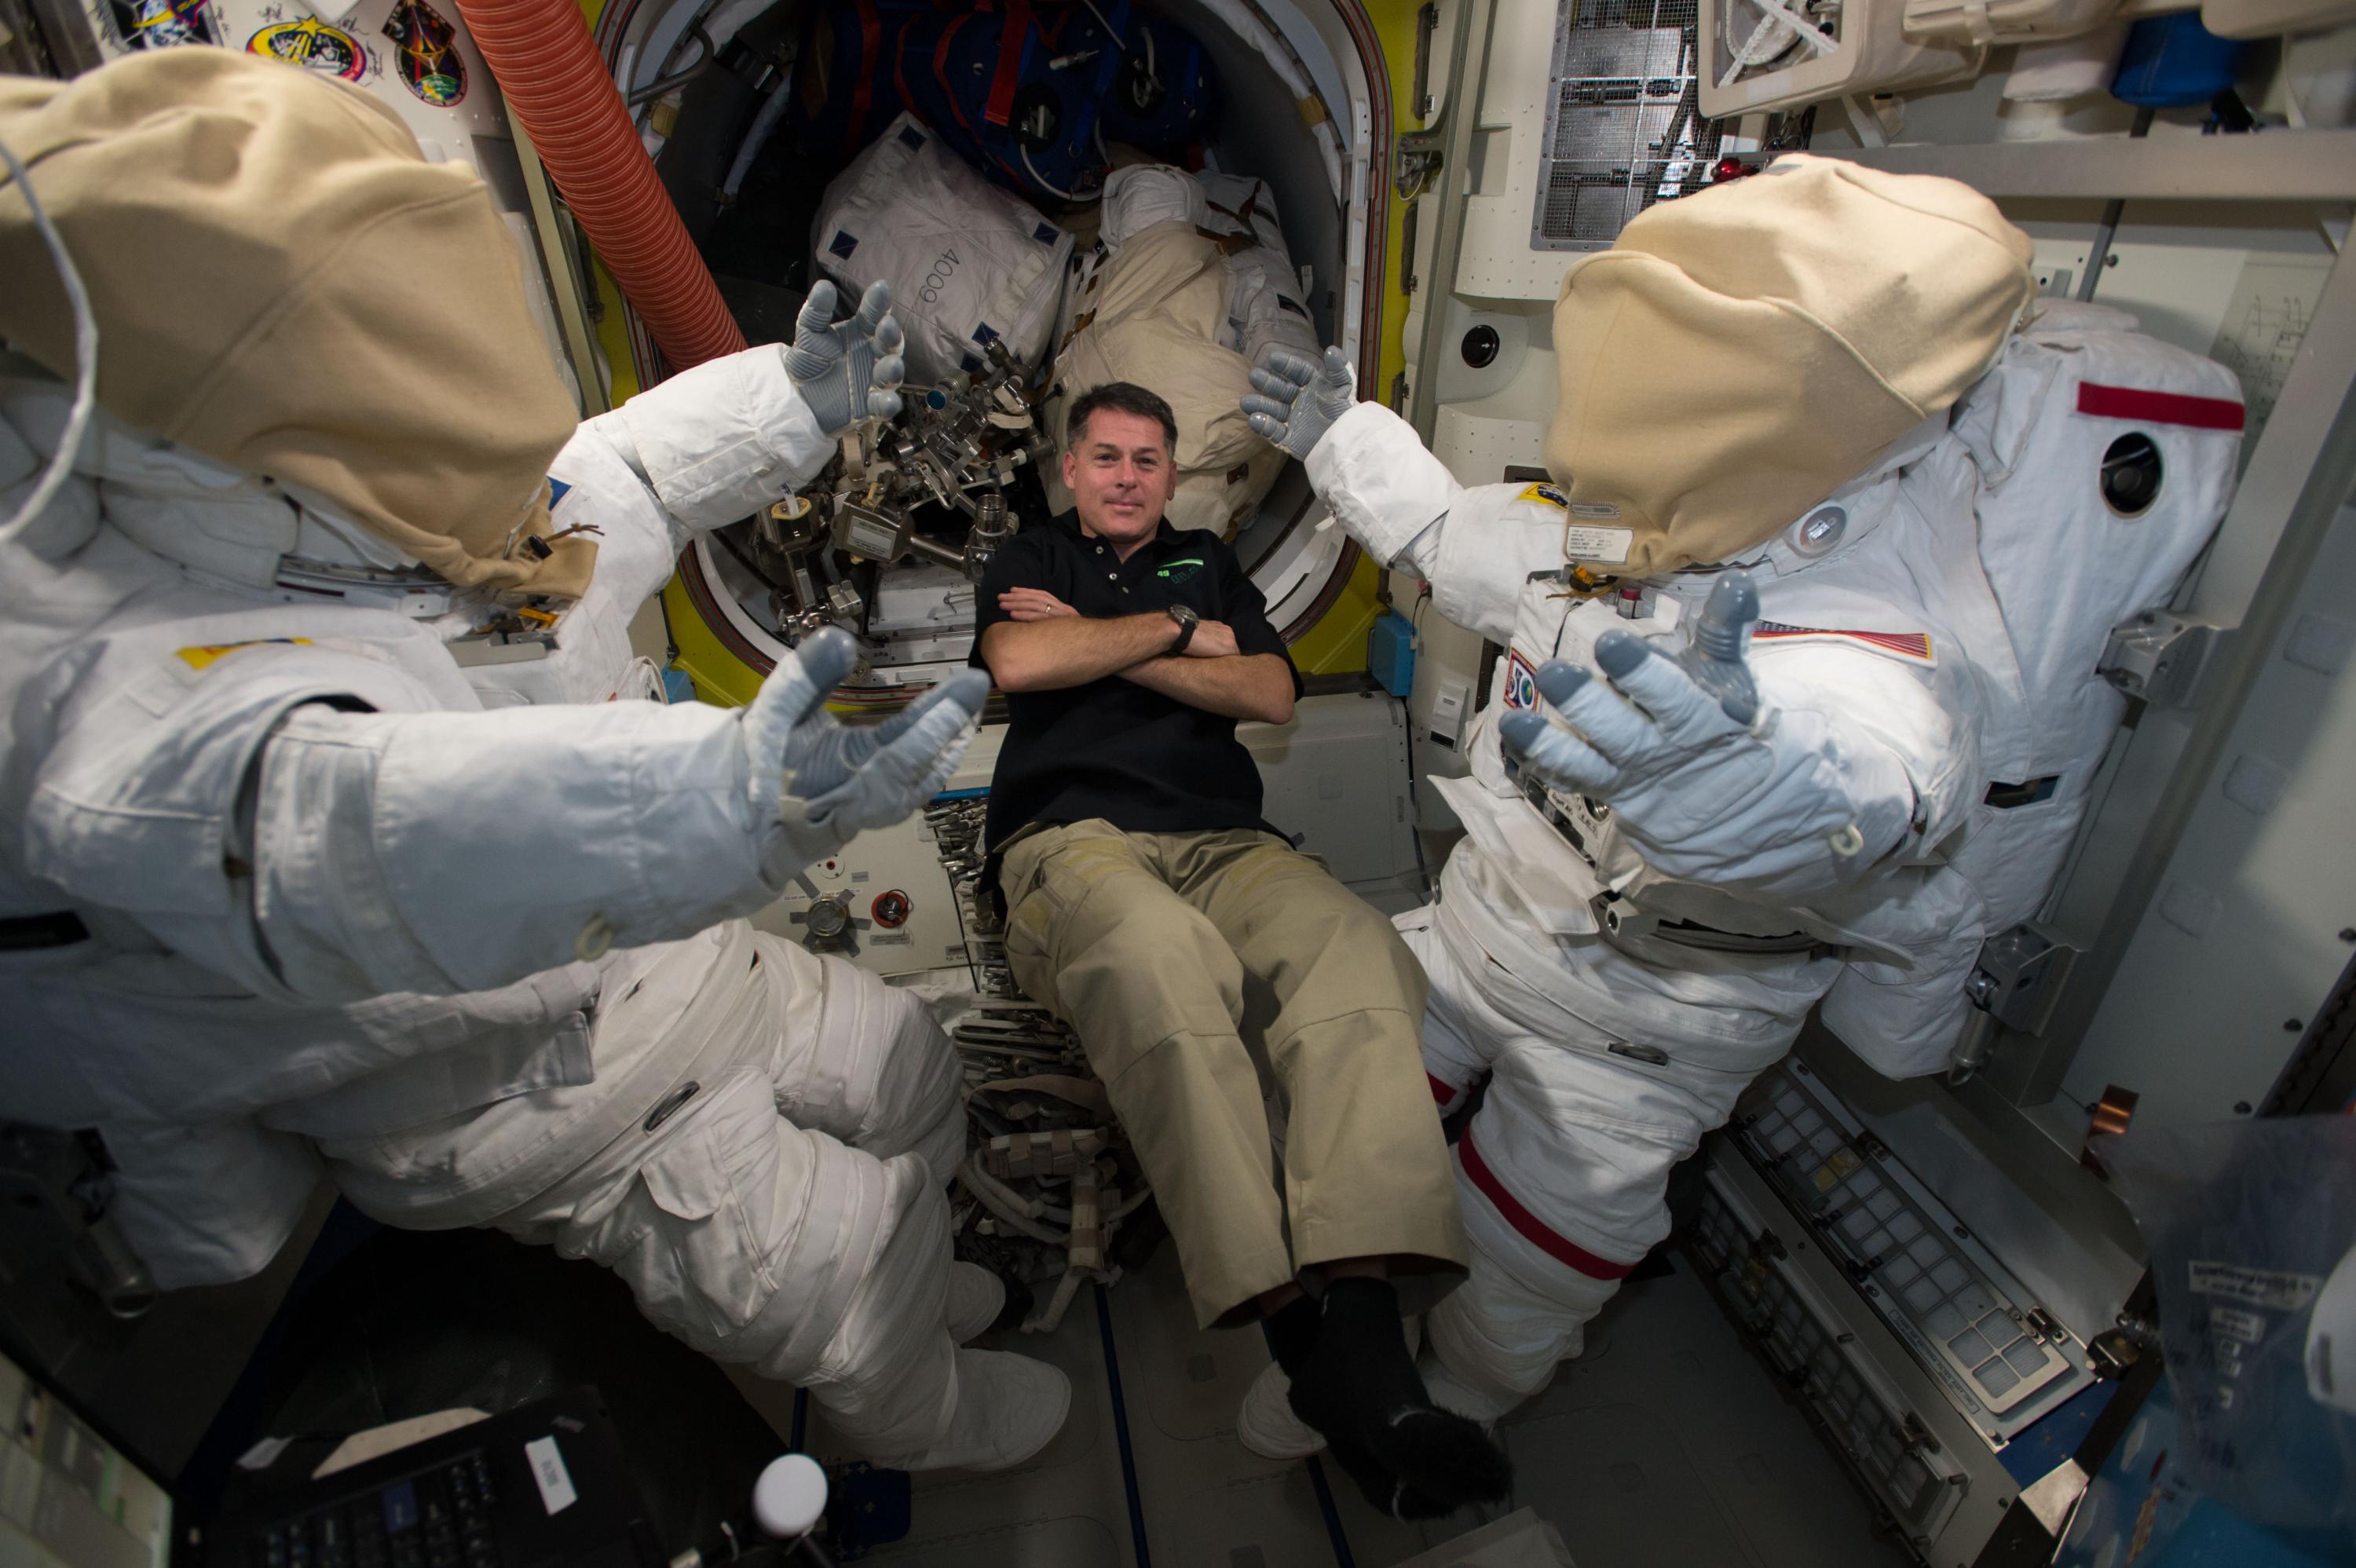 NASA astronaut Shane Kimbrough floats next to two U.S. spacesuits inside the Quest Airlock aboard the International Space Station.